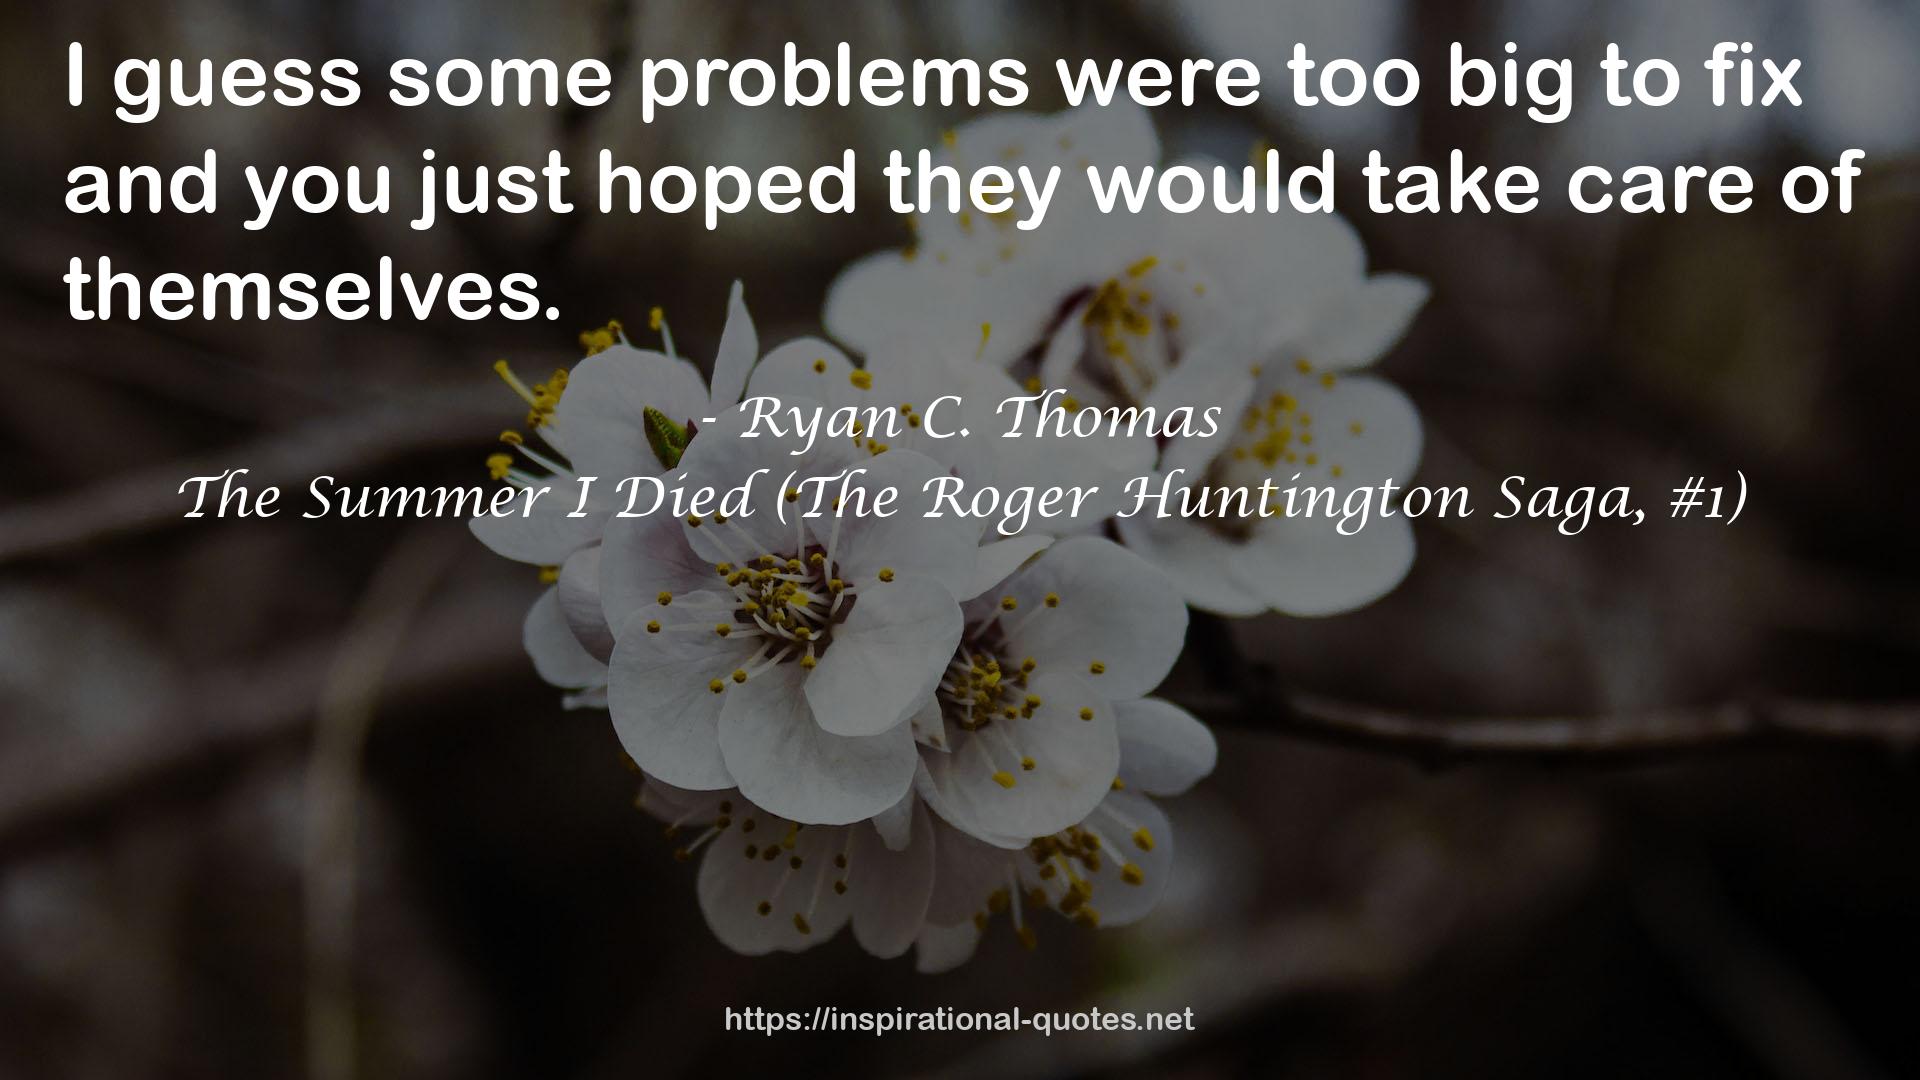 The Summer I Died (The Roger Huntington Saga, #1) QUOTES